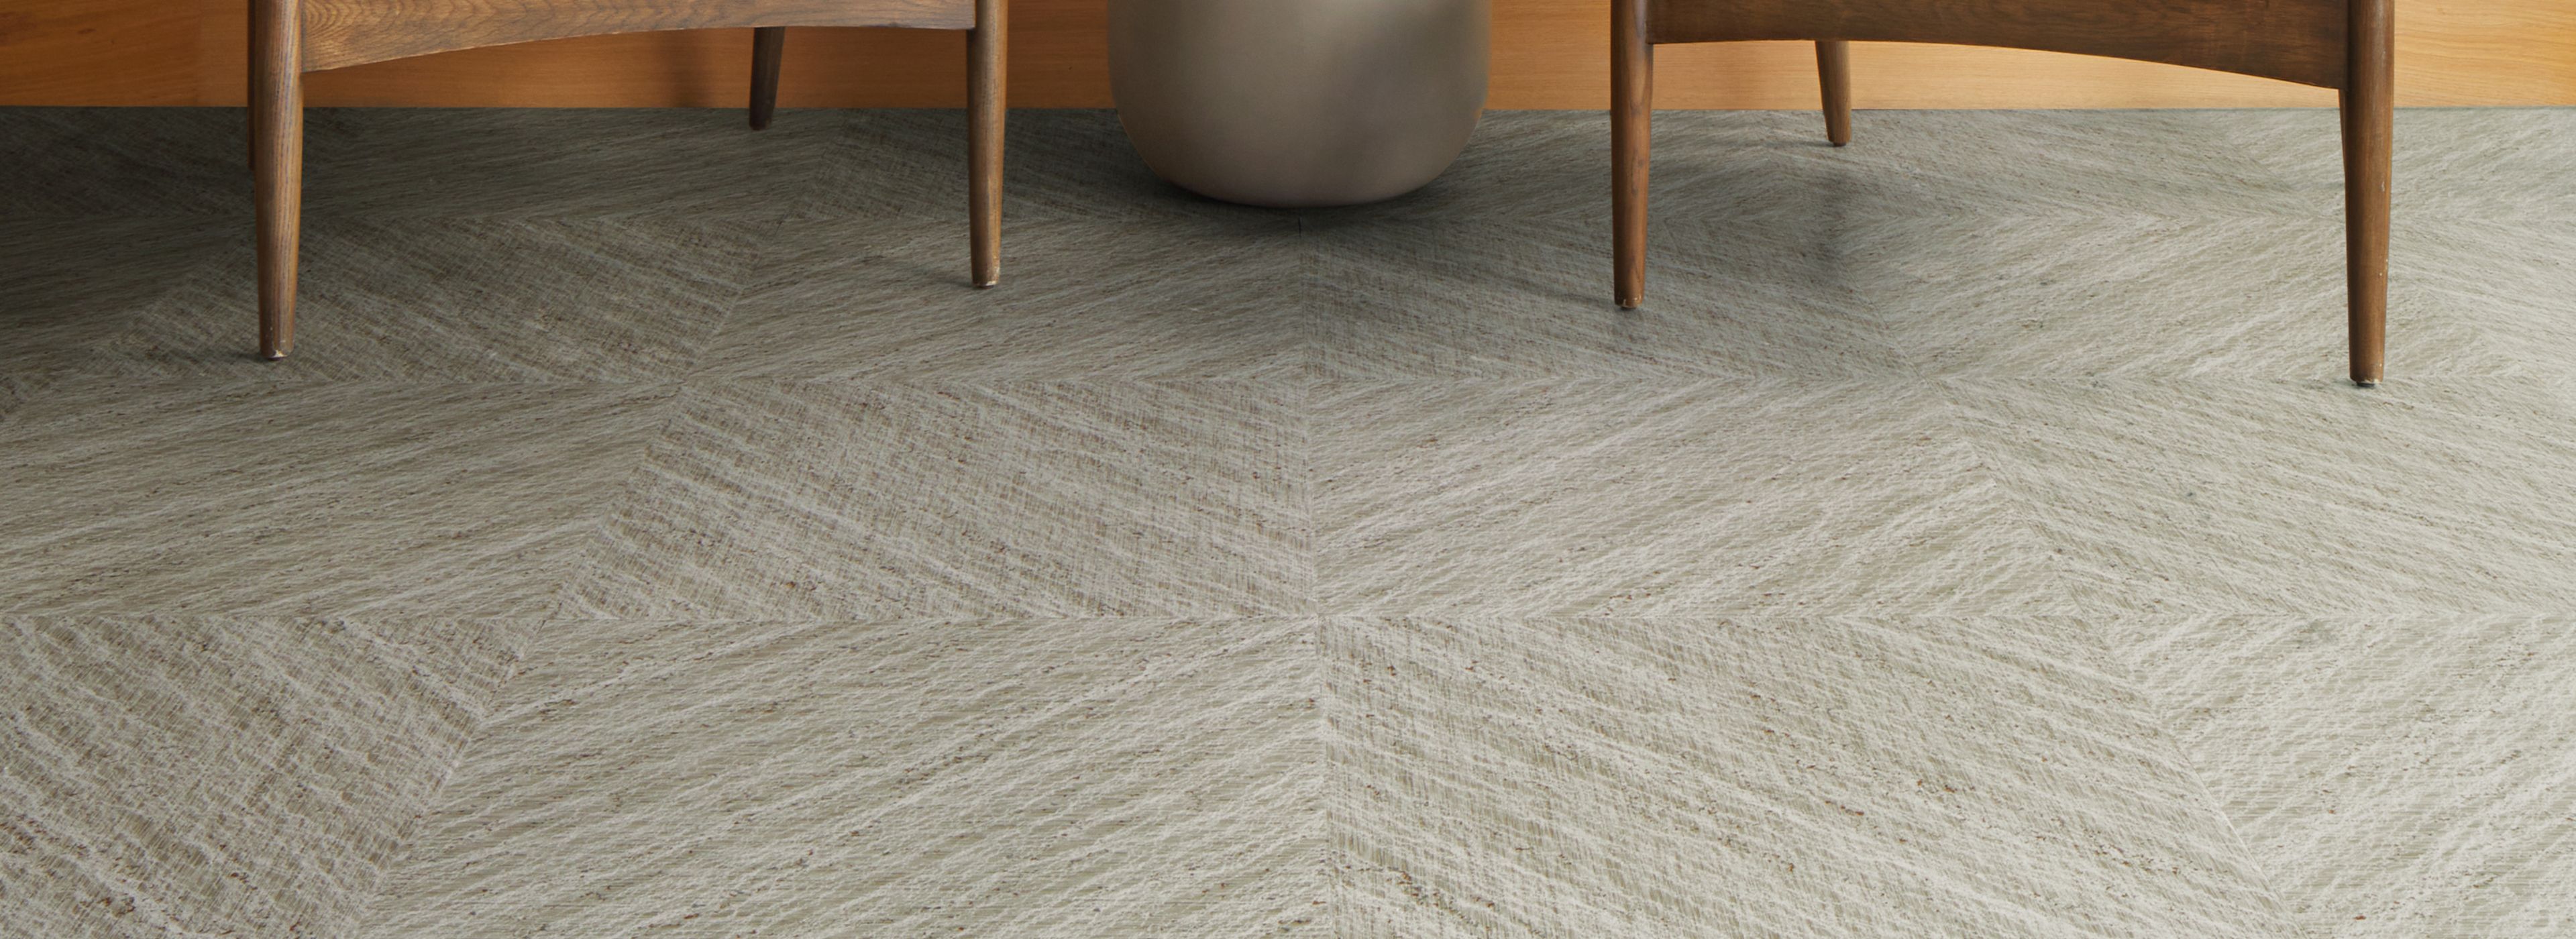 Interface Ridge LVT in Agate shown in a casual seating area Bildnummer 1